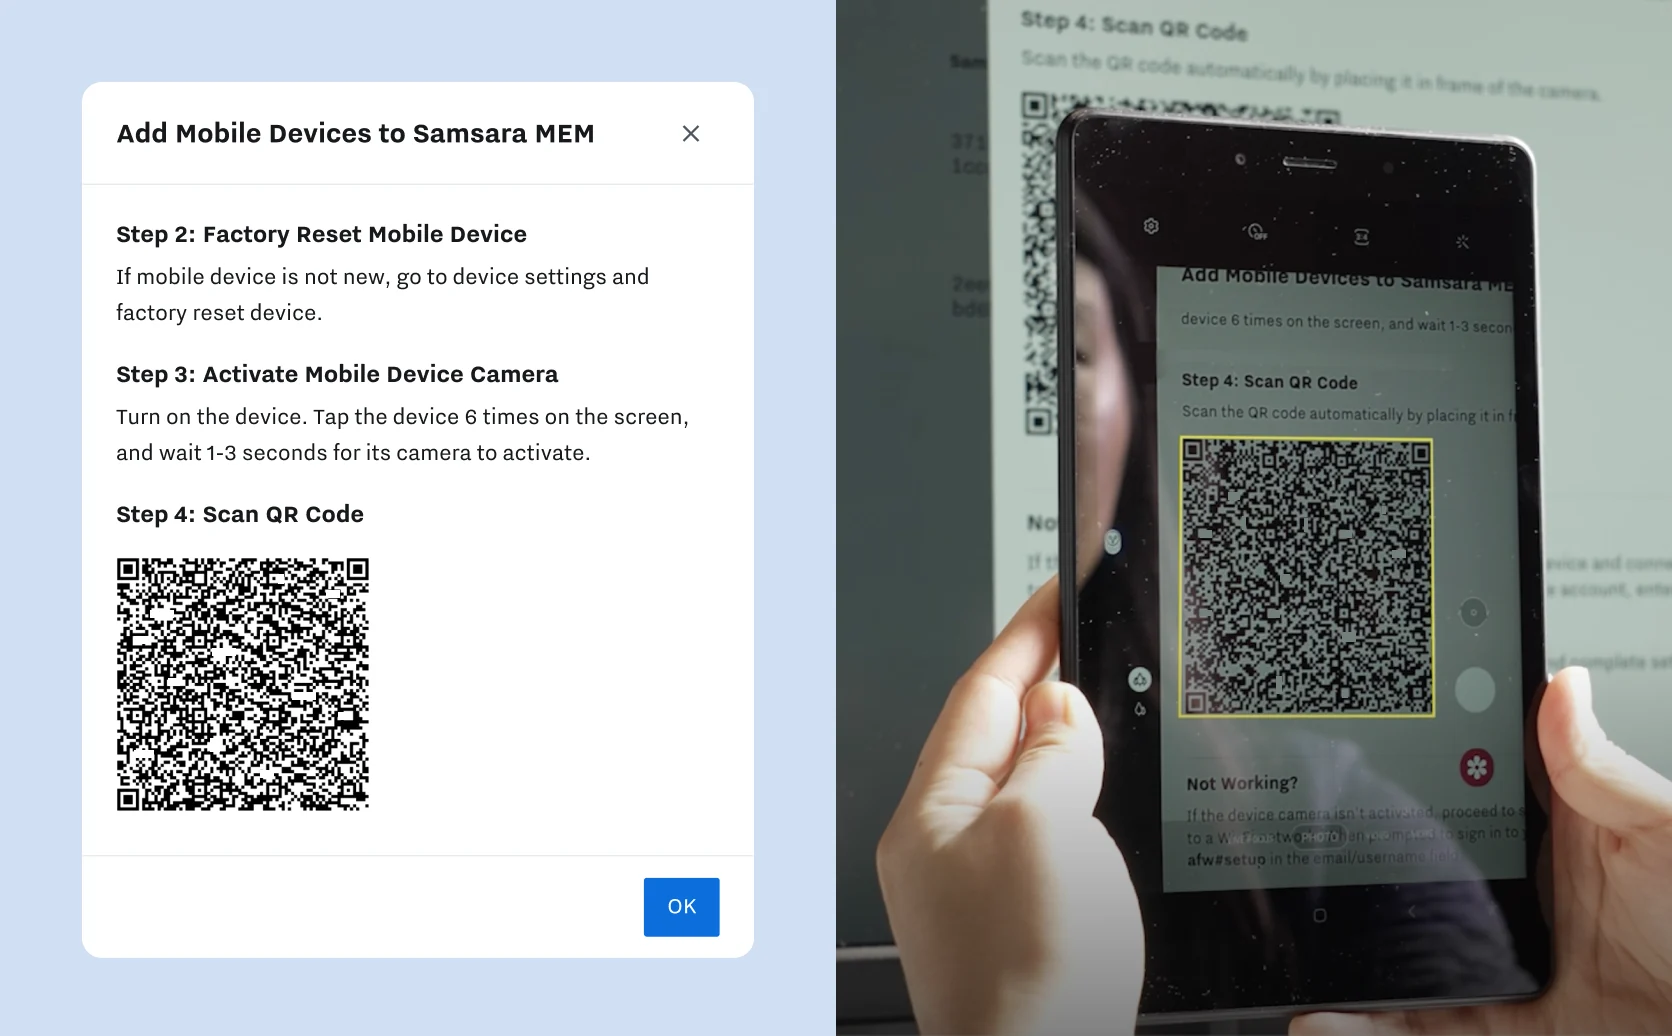 A product shot showing how to provision MEM with specific permissions and an image of hands scanning a QR code with a tablet